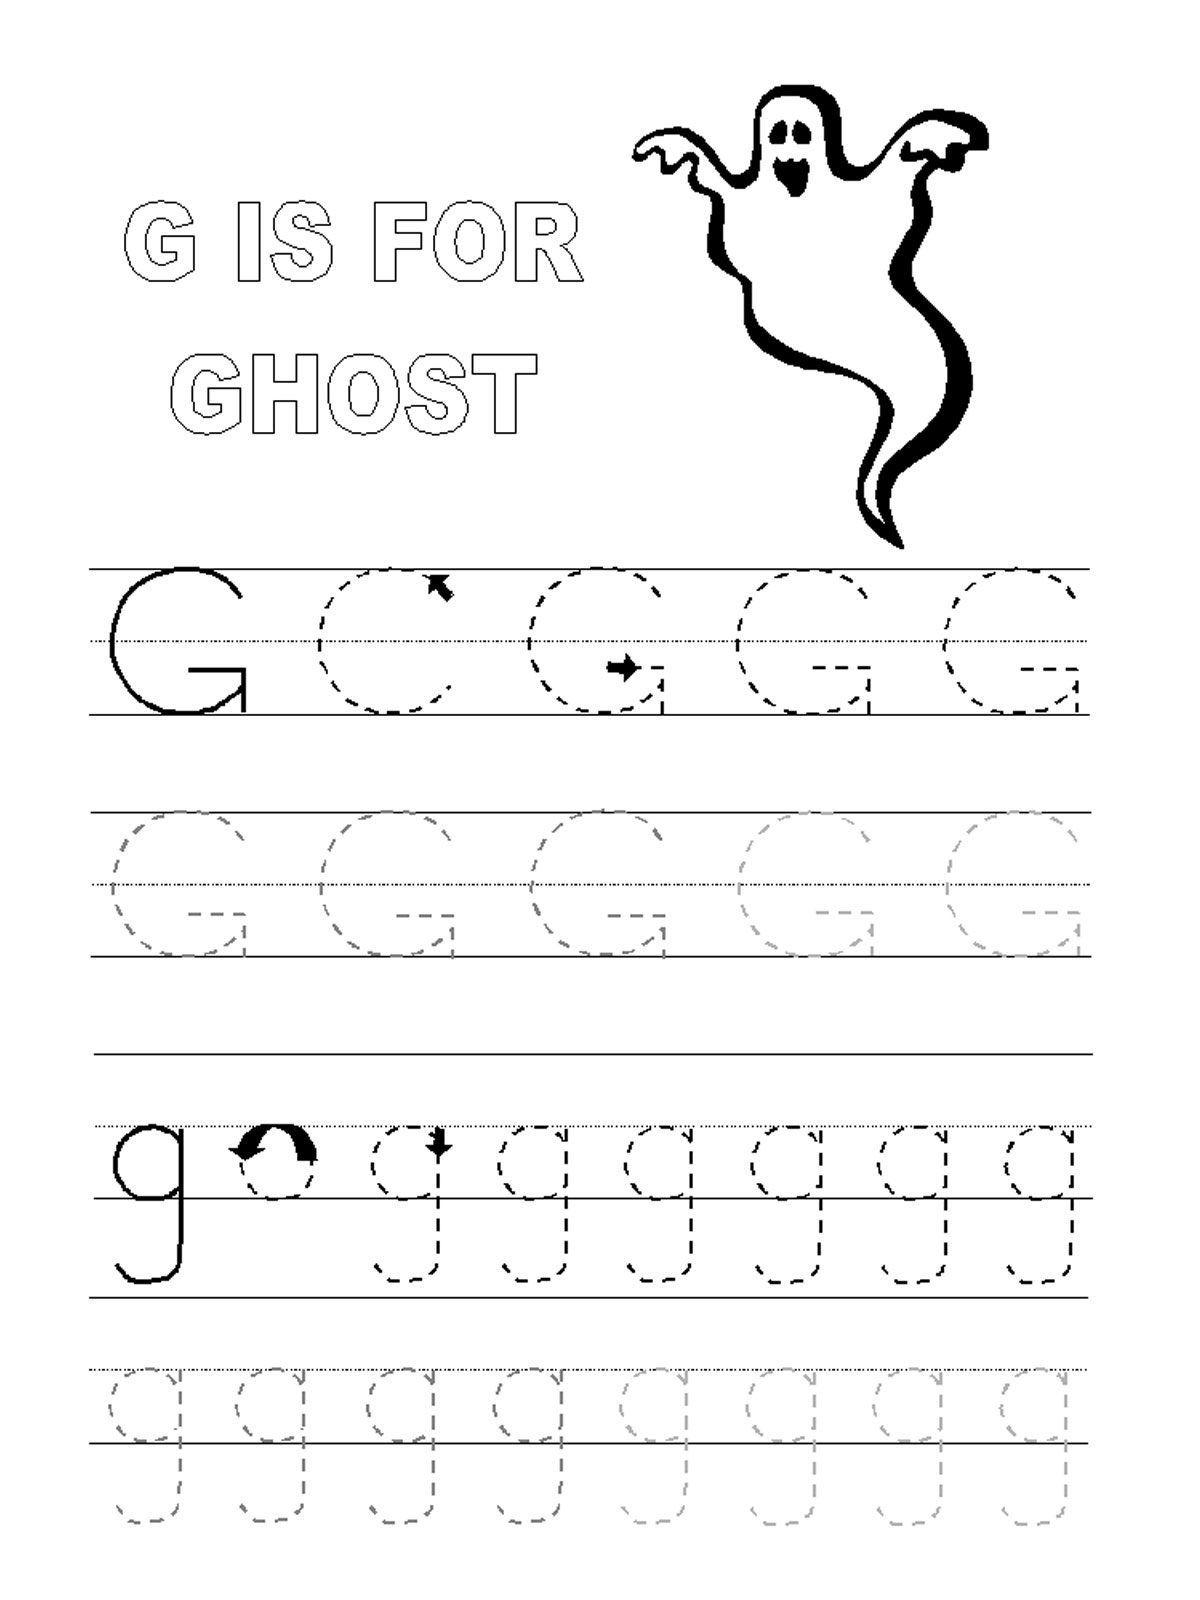 Trace Letter G Worksheets In 2020 | Tracing Worksheets within Letter G Tracing Worksheets Preschool